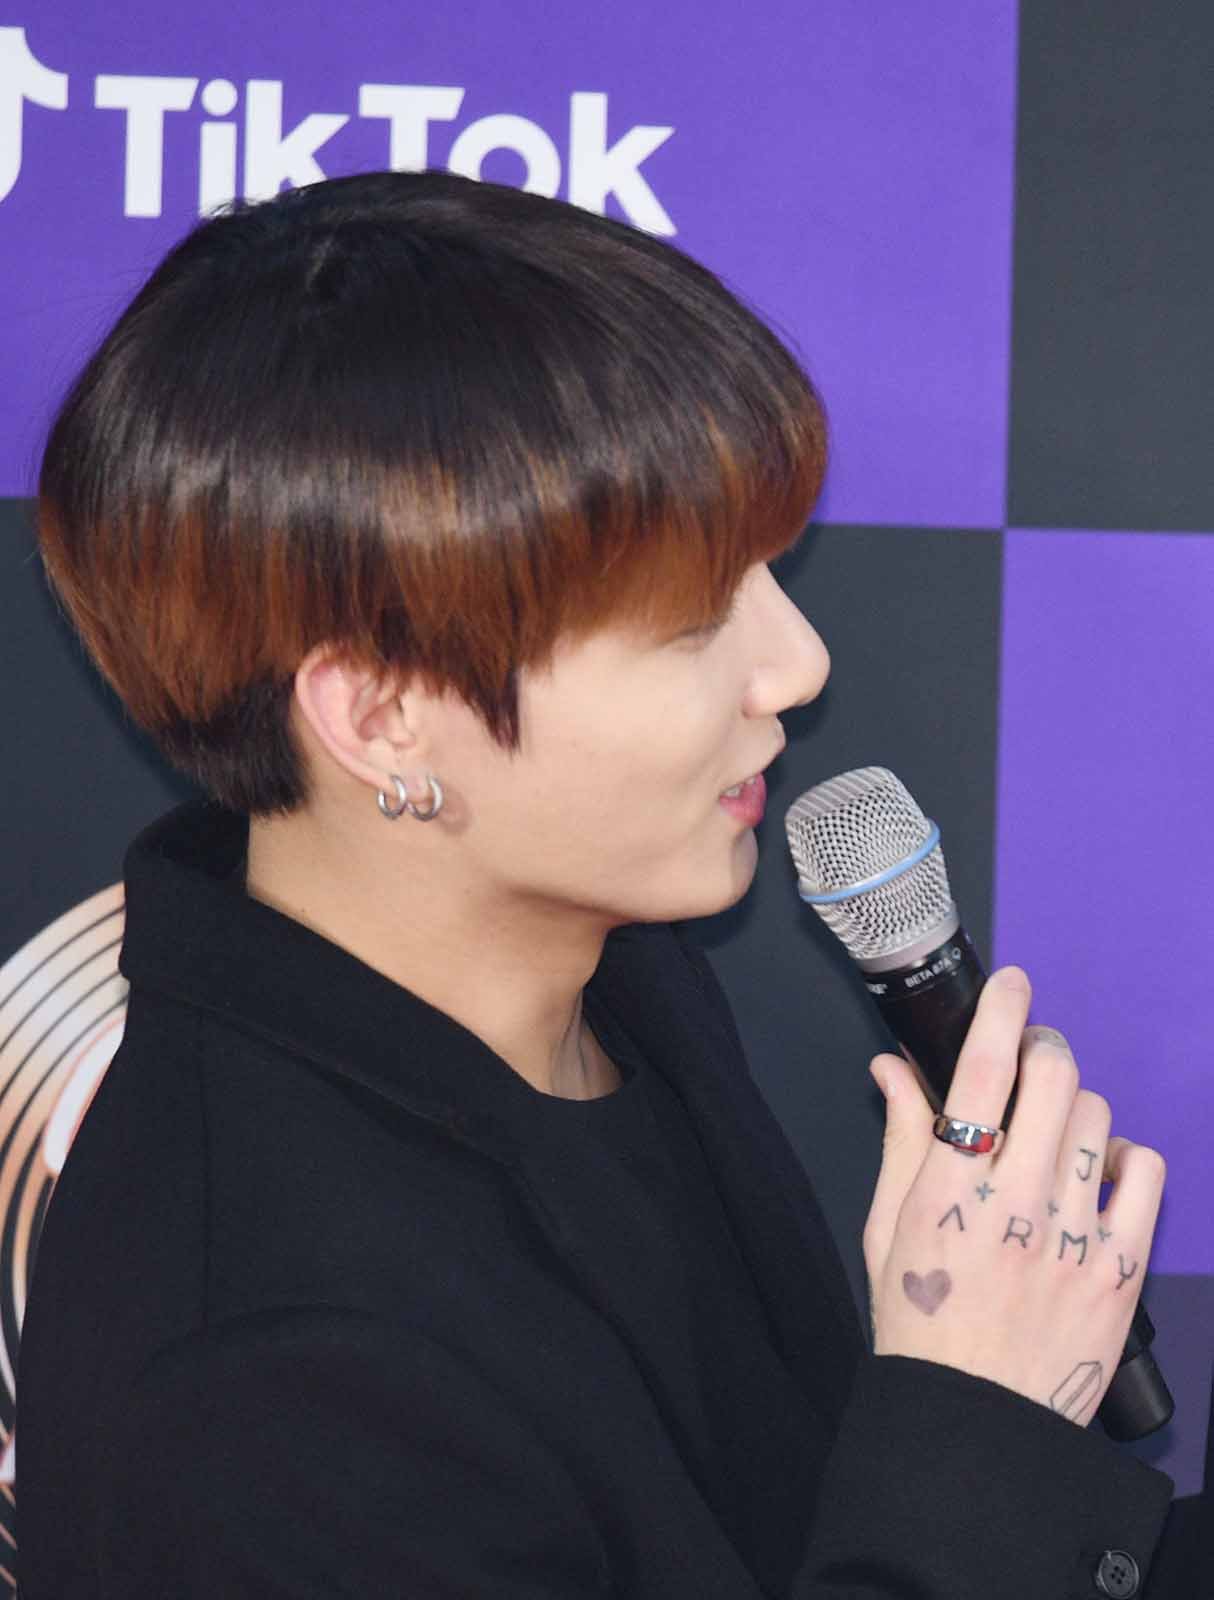 Tattoos still have a stigma in Korean, but that hasn't stopped some of BTS' members from getting tattoos. Take a look at their collection.